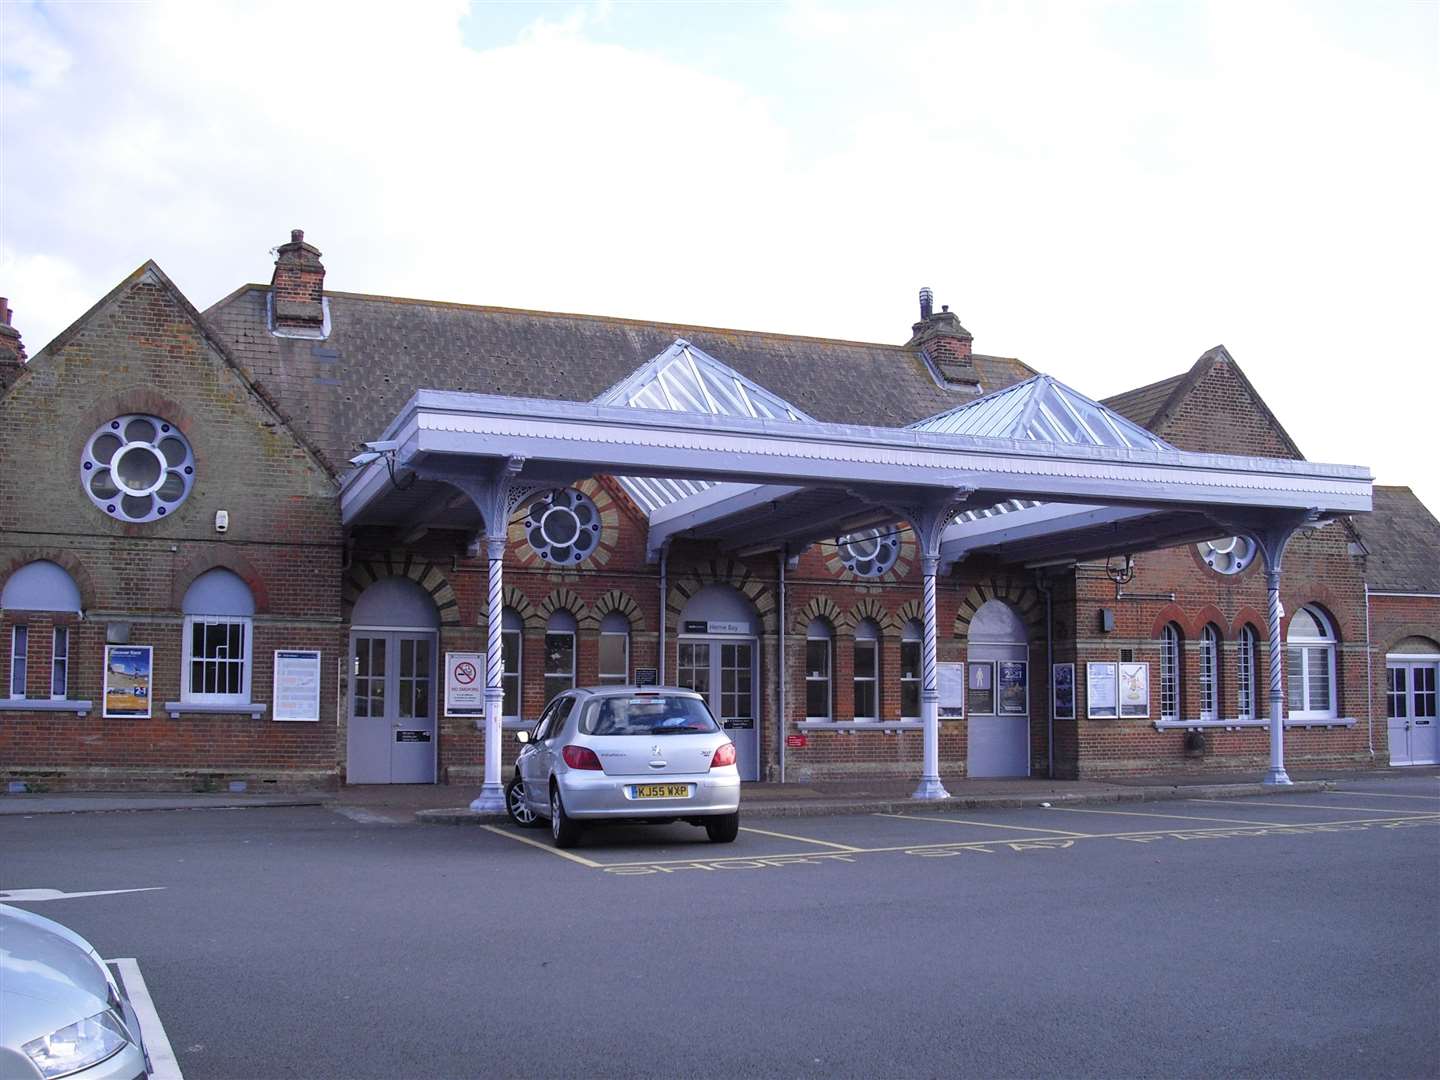 The incident happened at Herne Bay railway station